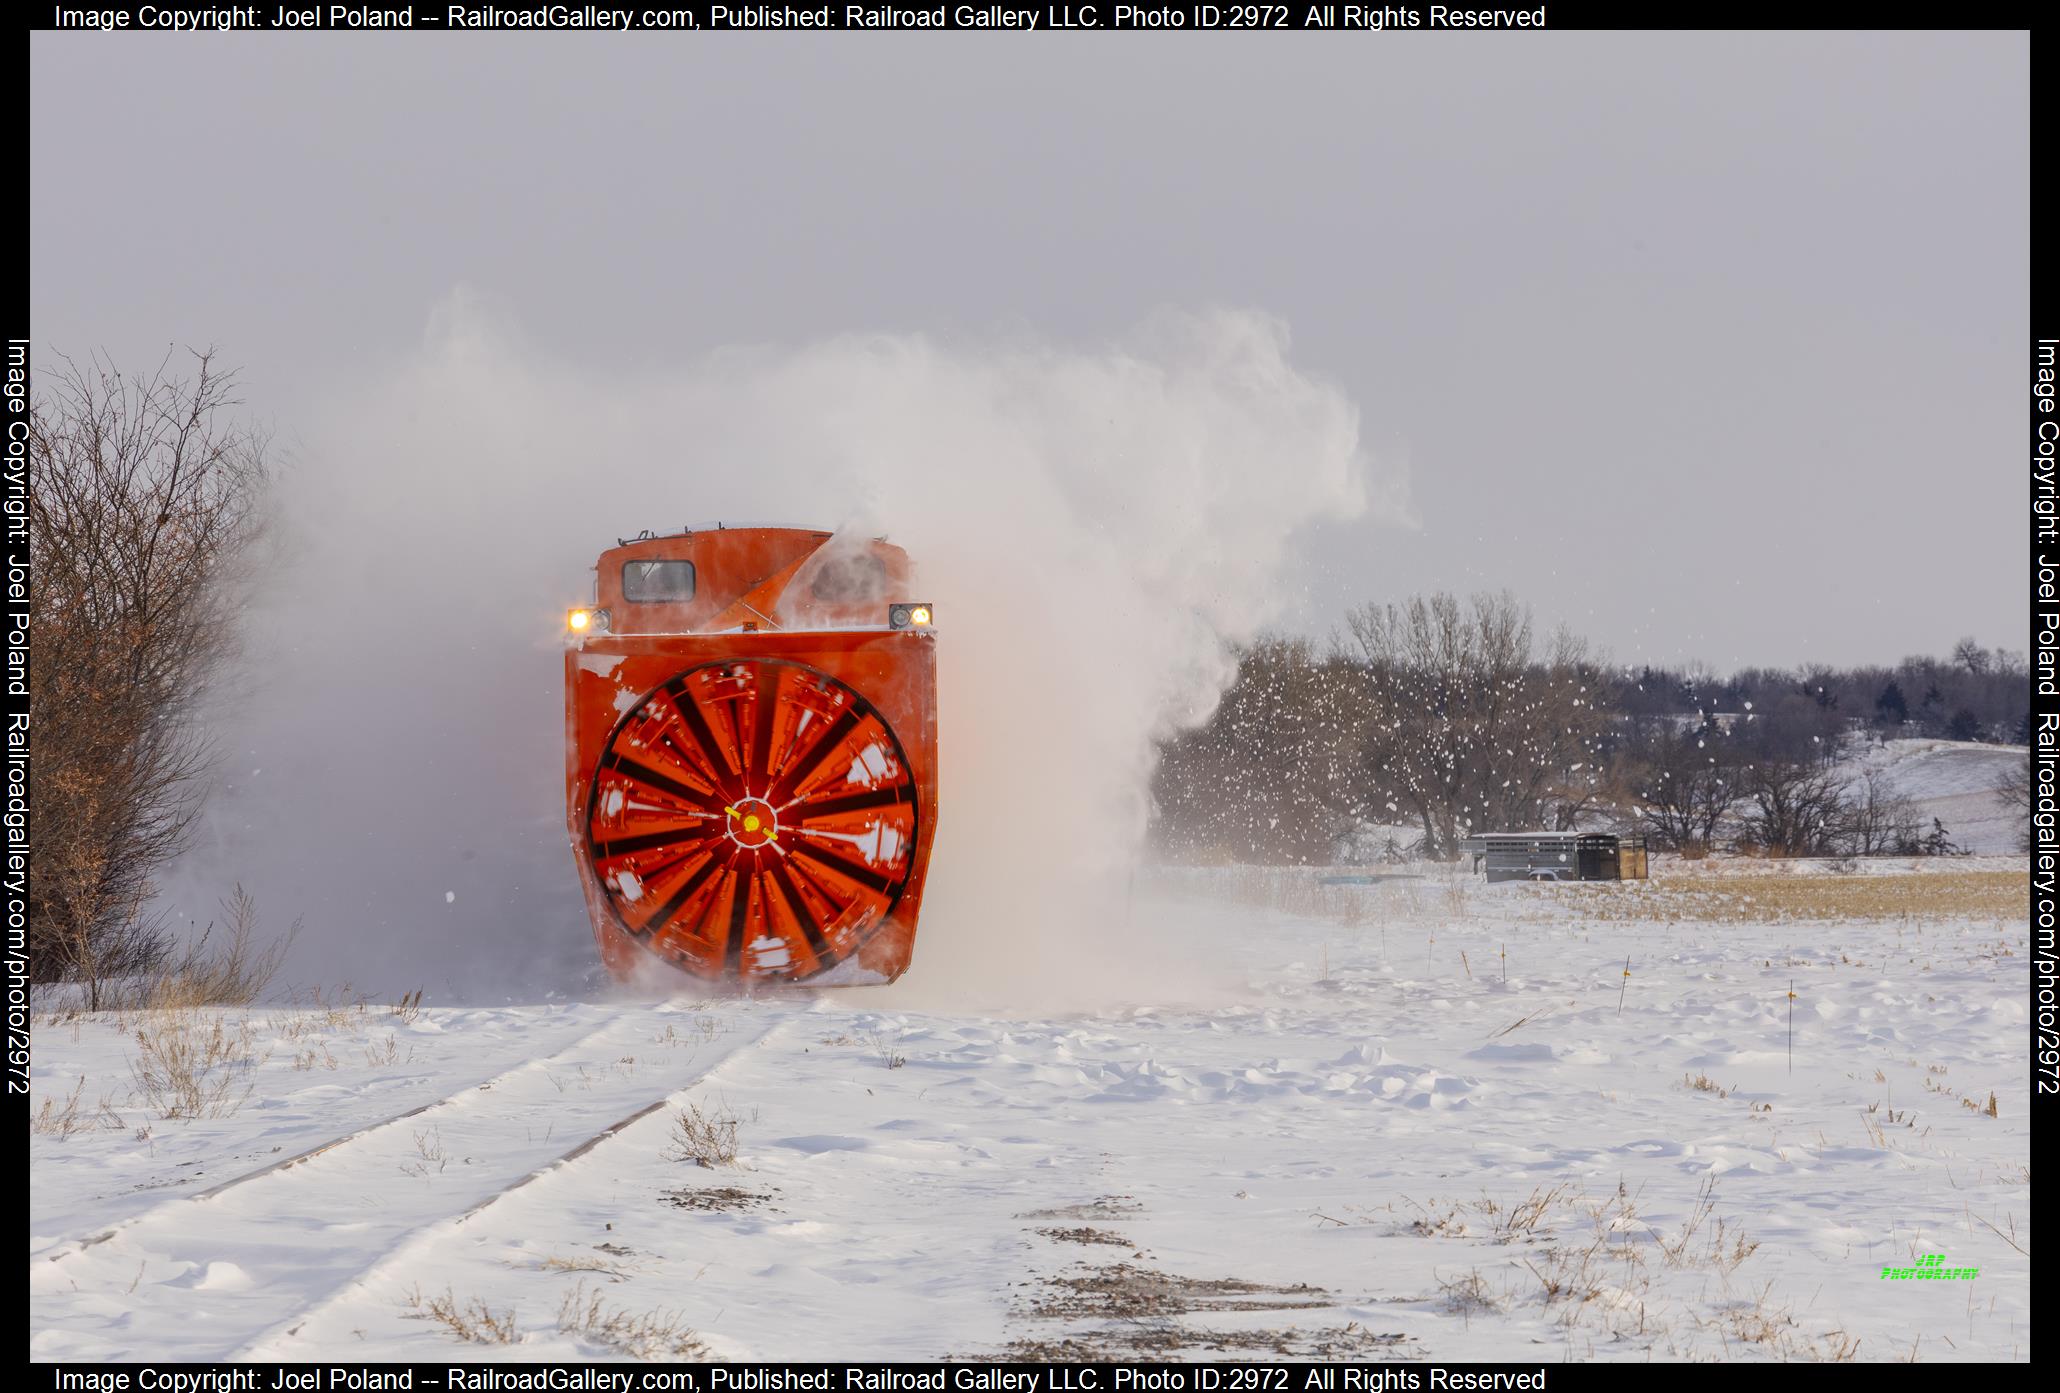 BNSF 972558 is a class Alco Rotary Snowplow and  is pictured in Bellwood , Nebraska, USA.  This was taken along the Bellwood Sub on the BNSF Railway. Photo Copyright: Joel Poland uploaded to Railroad Gallery on 01/16/2024. This photograph of BNSF 972558 was taken on Monday, January 15, 2024. All Rights Reserved. 